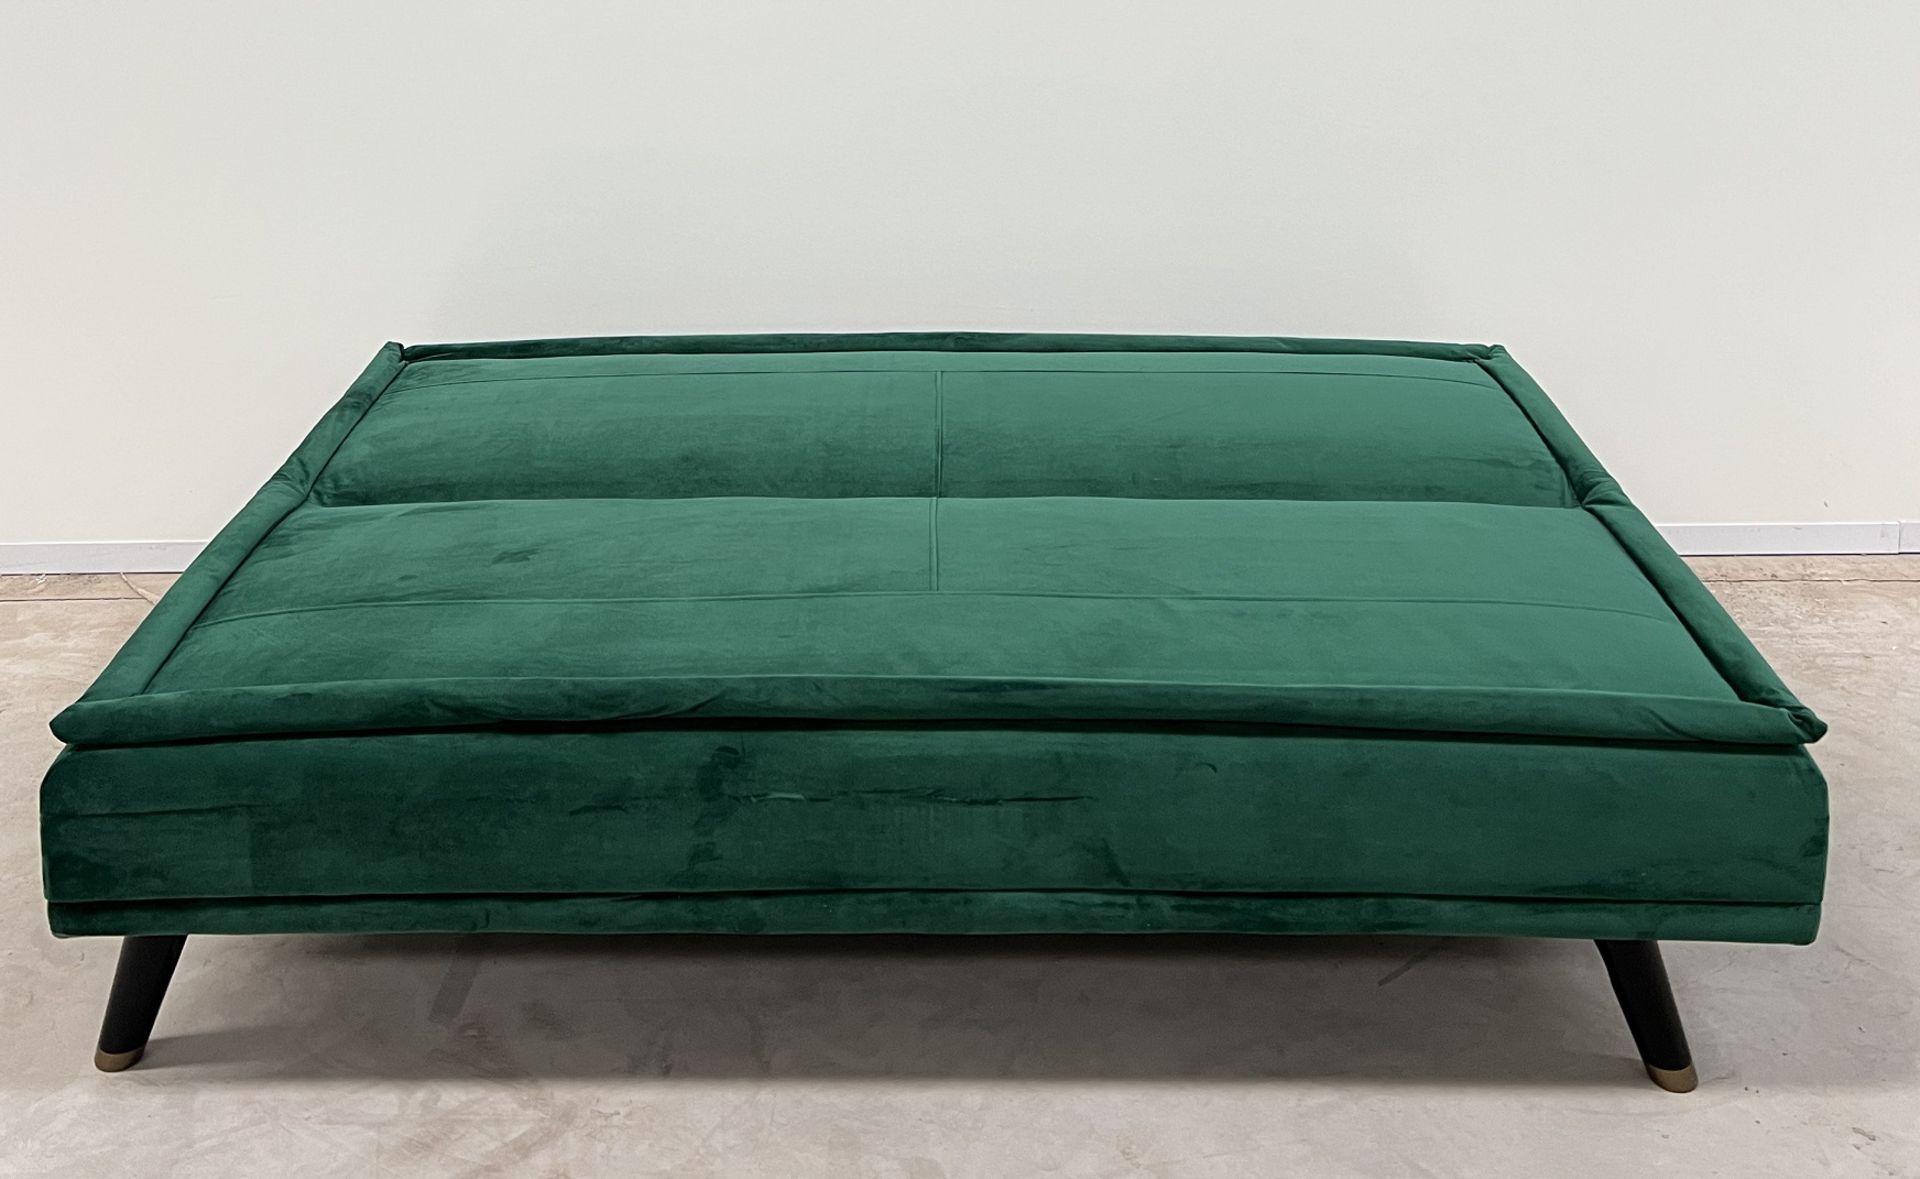 Green Velvet Upholstered Sofa Bed Is Ideal For Those Looking For A Sleek Space-Saving Design. In A - Image 2 of 3